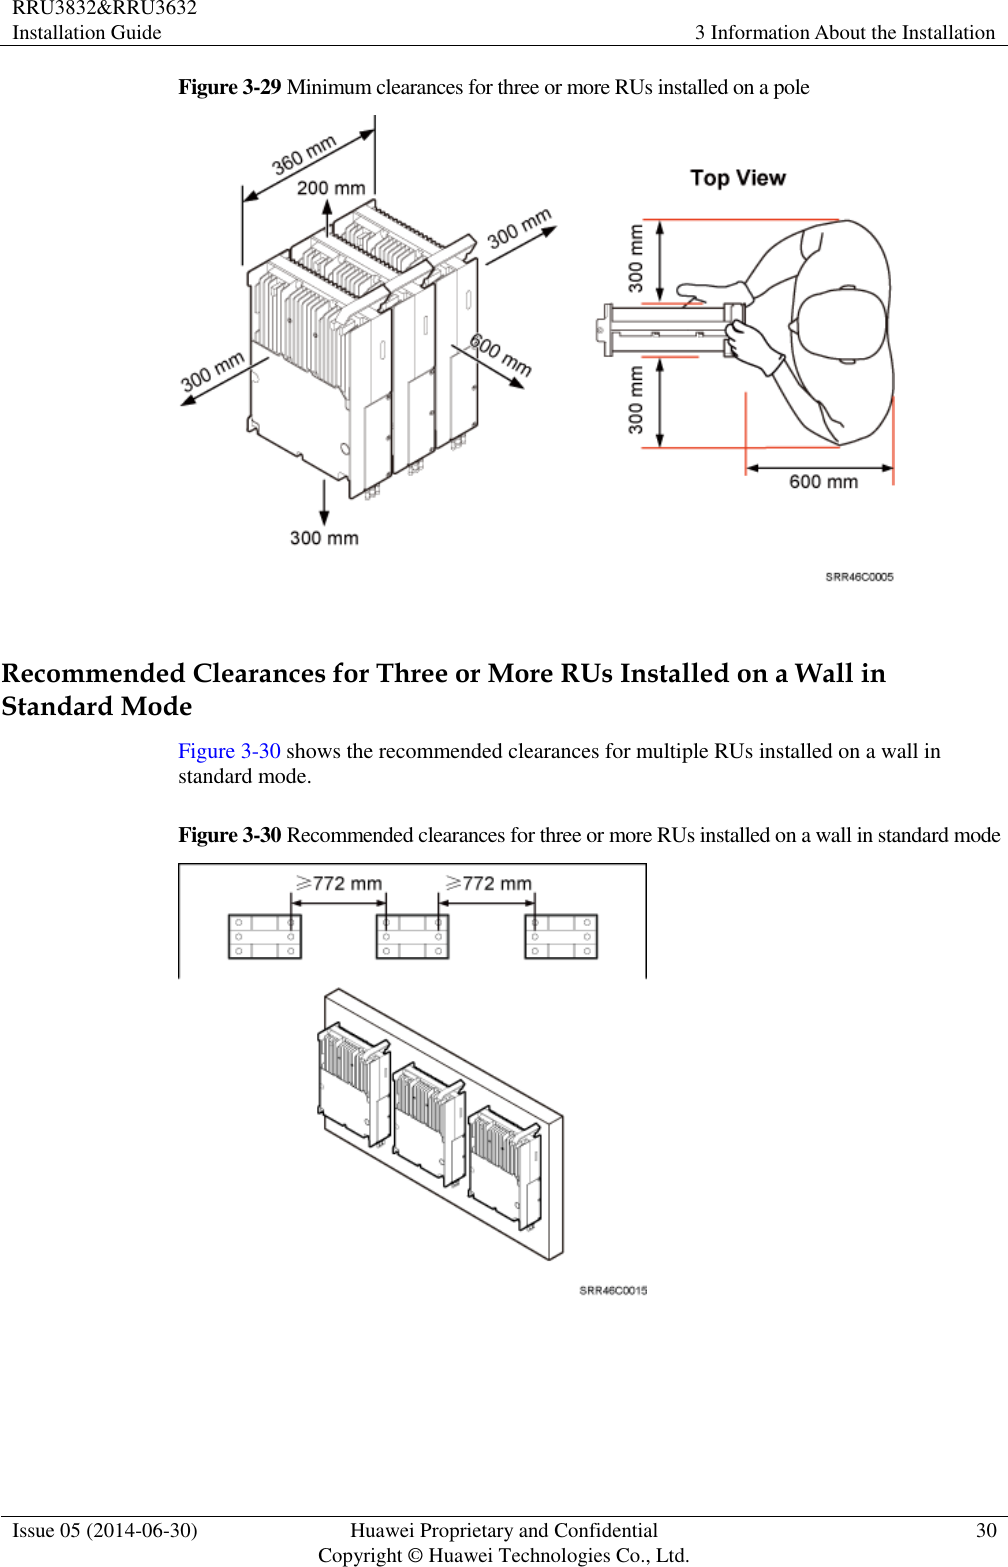 RRU3832&amp;RRU3632 Installation Guide 3 Information About the Installation  Issue 05 (2014-06-30) Huawei Proprietary and Confidential                                     Copyright © Huawei Technologies Co., Ltd. 30  Figure 3-29 Minimum clearances for three or more RUs installed on a pole   Recommended Clearances for Three or More RUs Installed on a Wall in Standard Mode Figure 3-30 shows the recommended clearances for multiple RUs installed on a wall in standard mode. Figure 3-30 Recommended clearances for three or more RUs installed on a wall in standard mode   